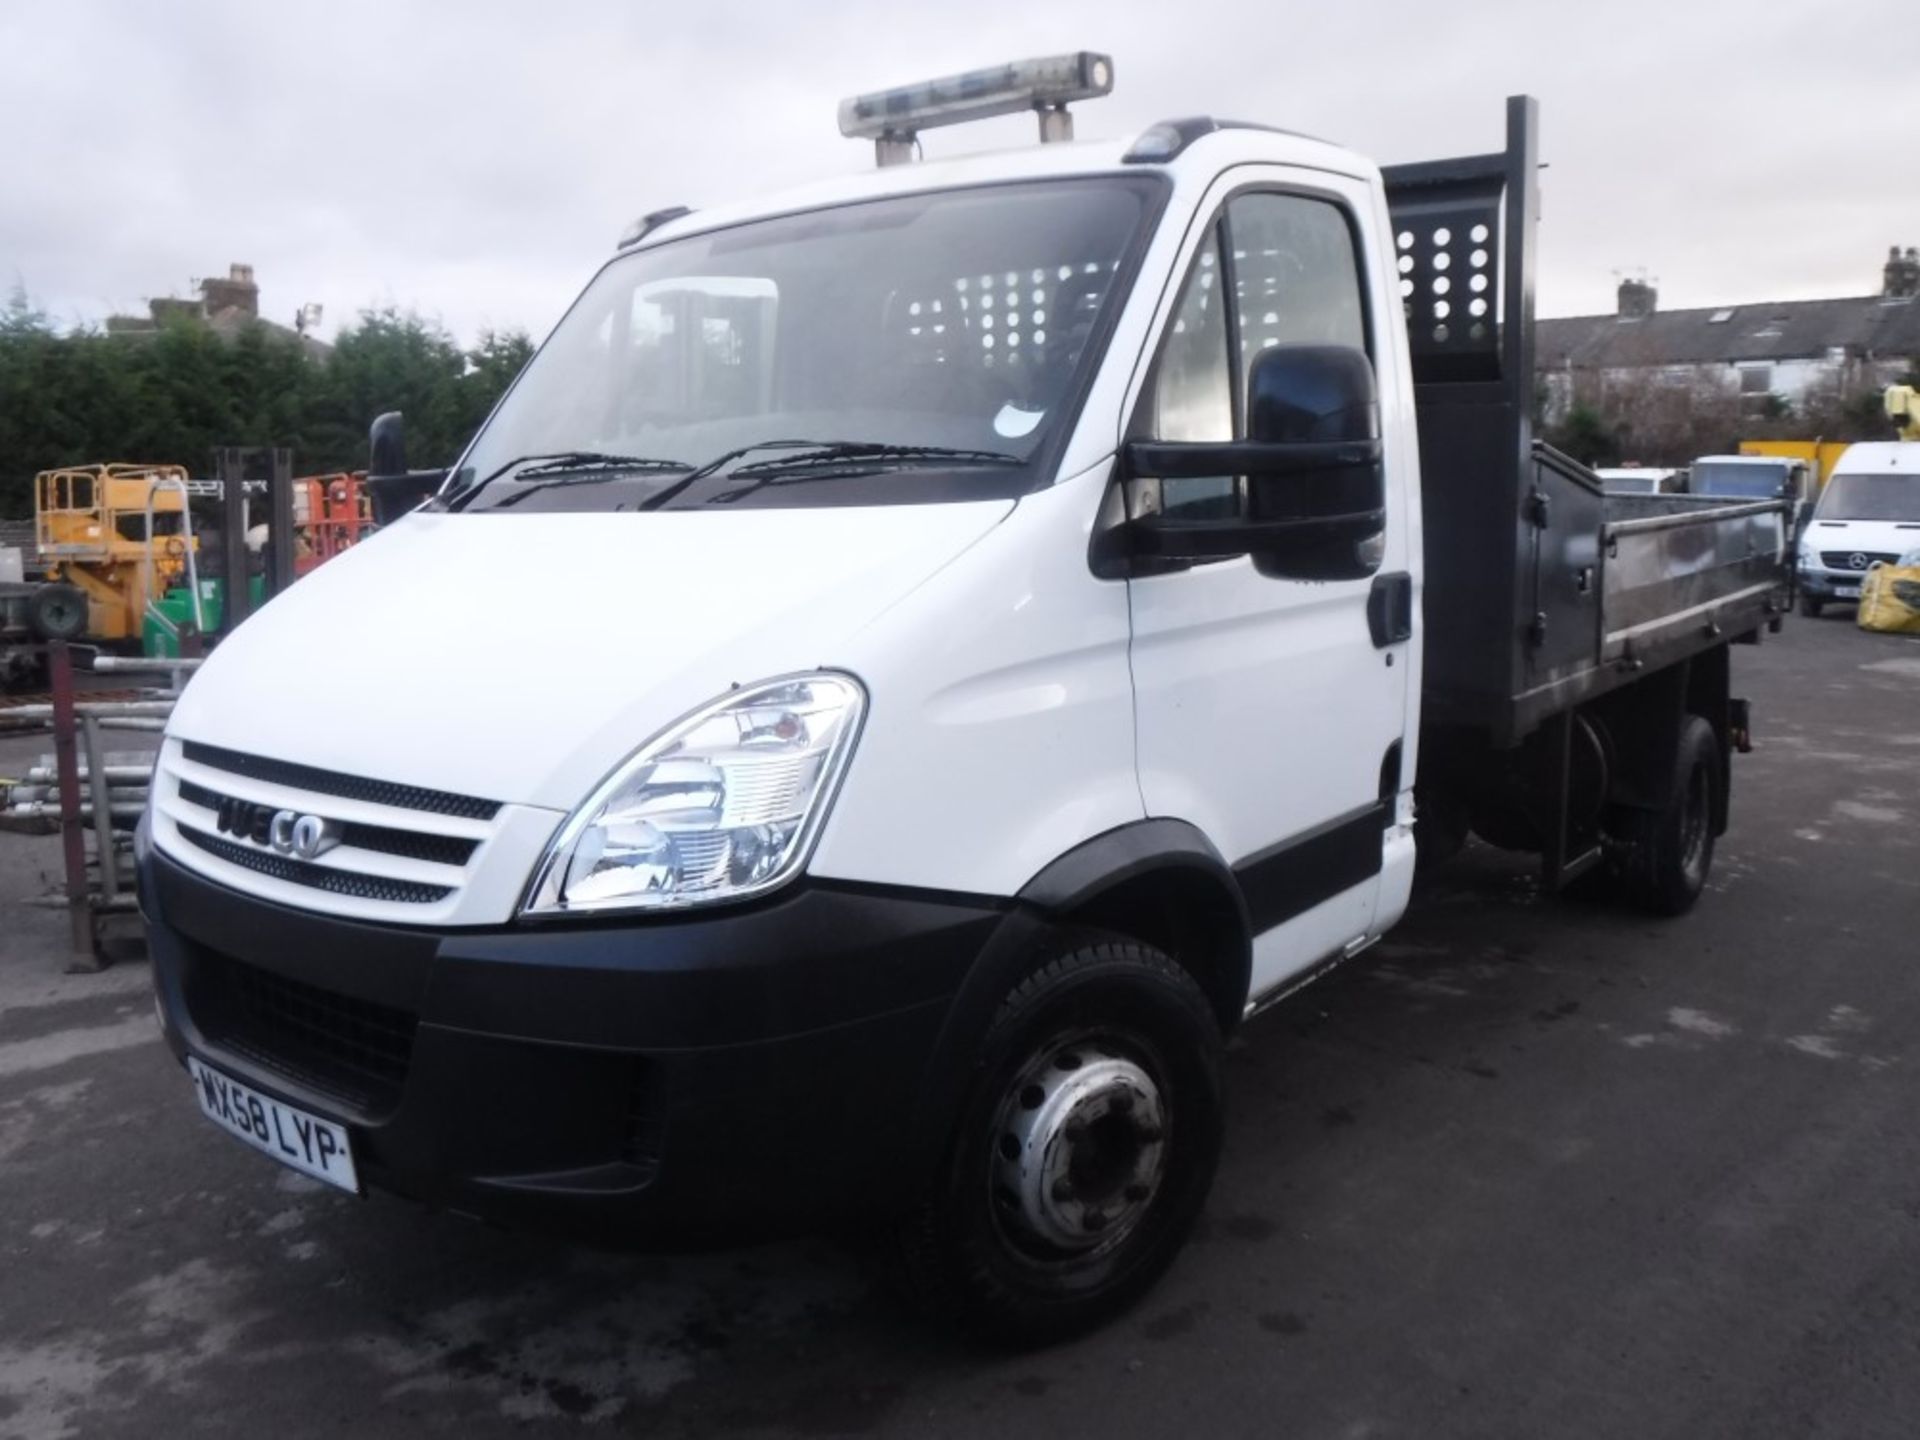 58 reg IVECO DAILY 65C18 TIPPER, 1ST REG 10/08, HGV TEST 10/18, 42438M, V5 HERE, 1 OWNER FROM NEW ( - Image 2 of 5